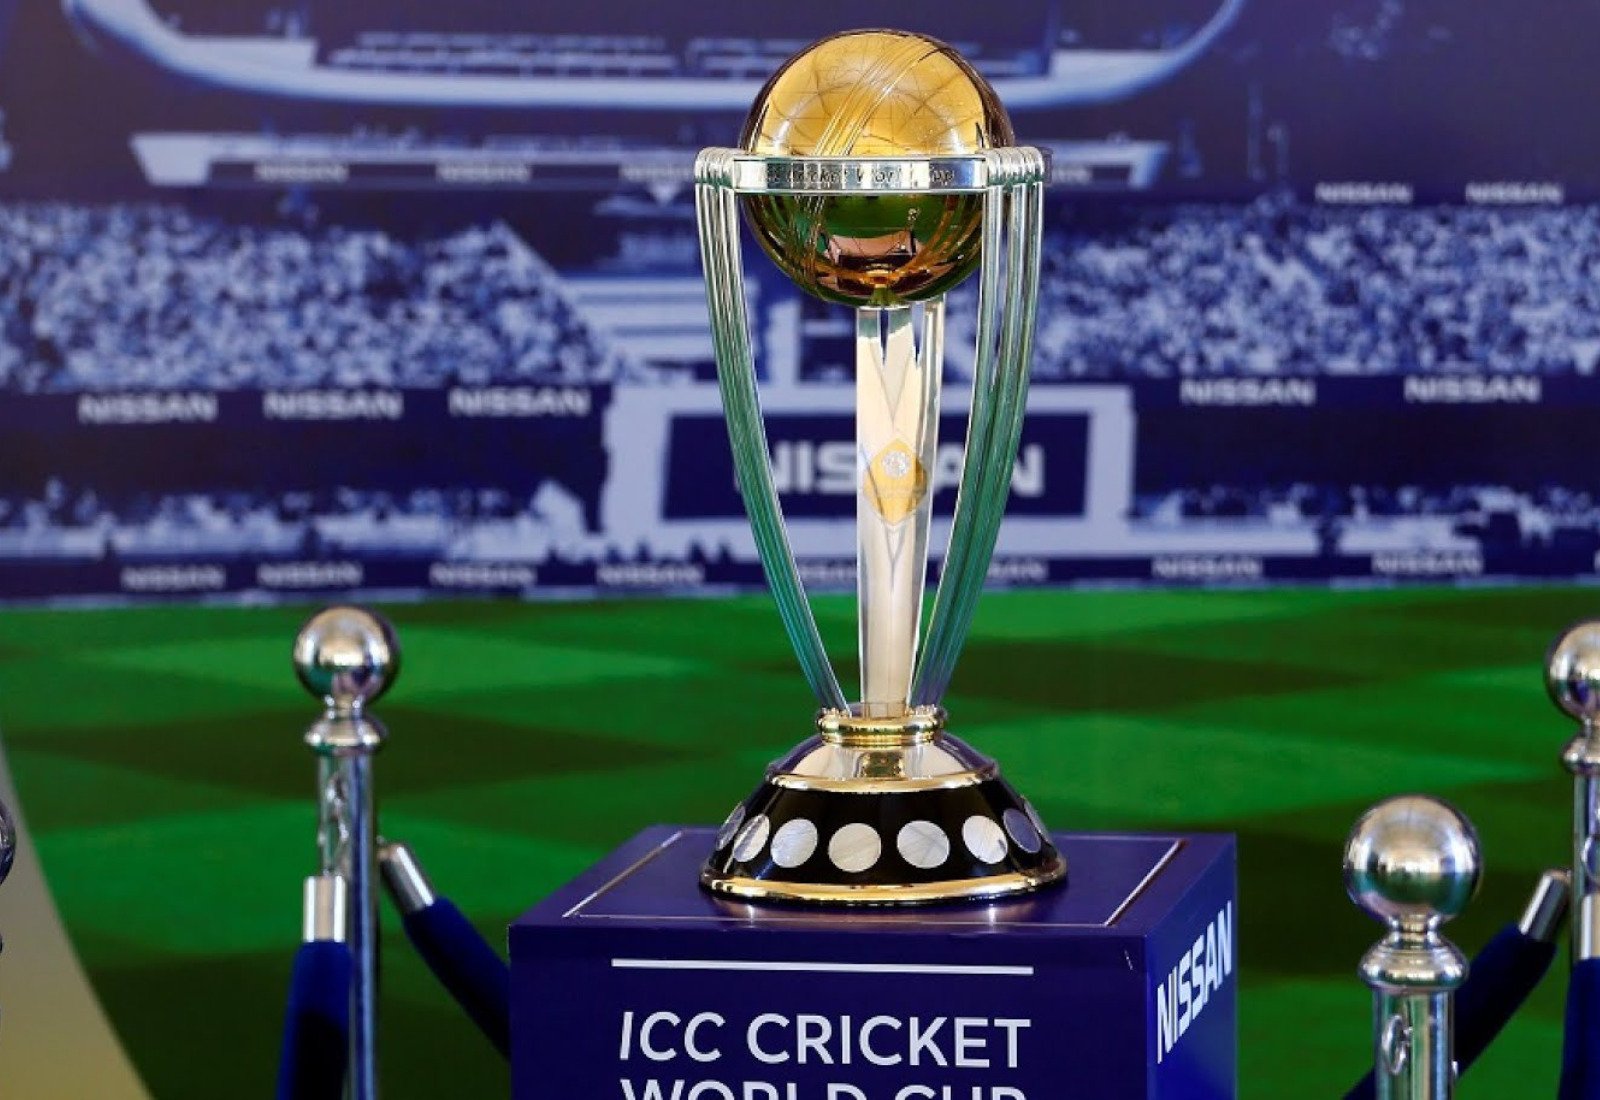 Read more about the article ICC Cricket World Cup 2023: Top 5 Teams, Intriguing Matchups and Potential Edge Analysis.